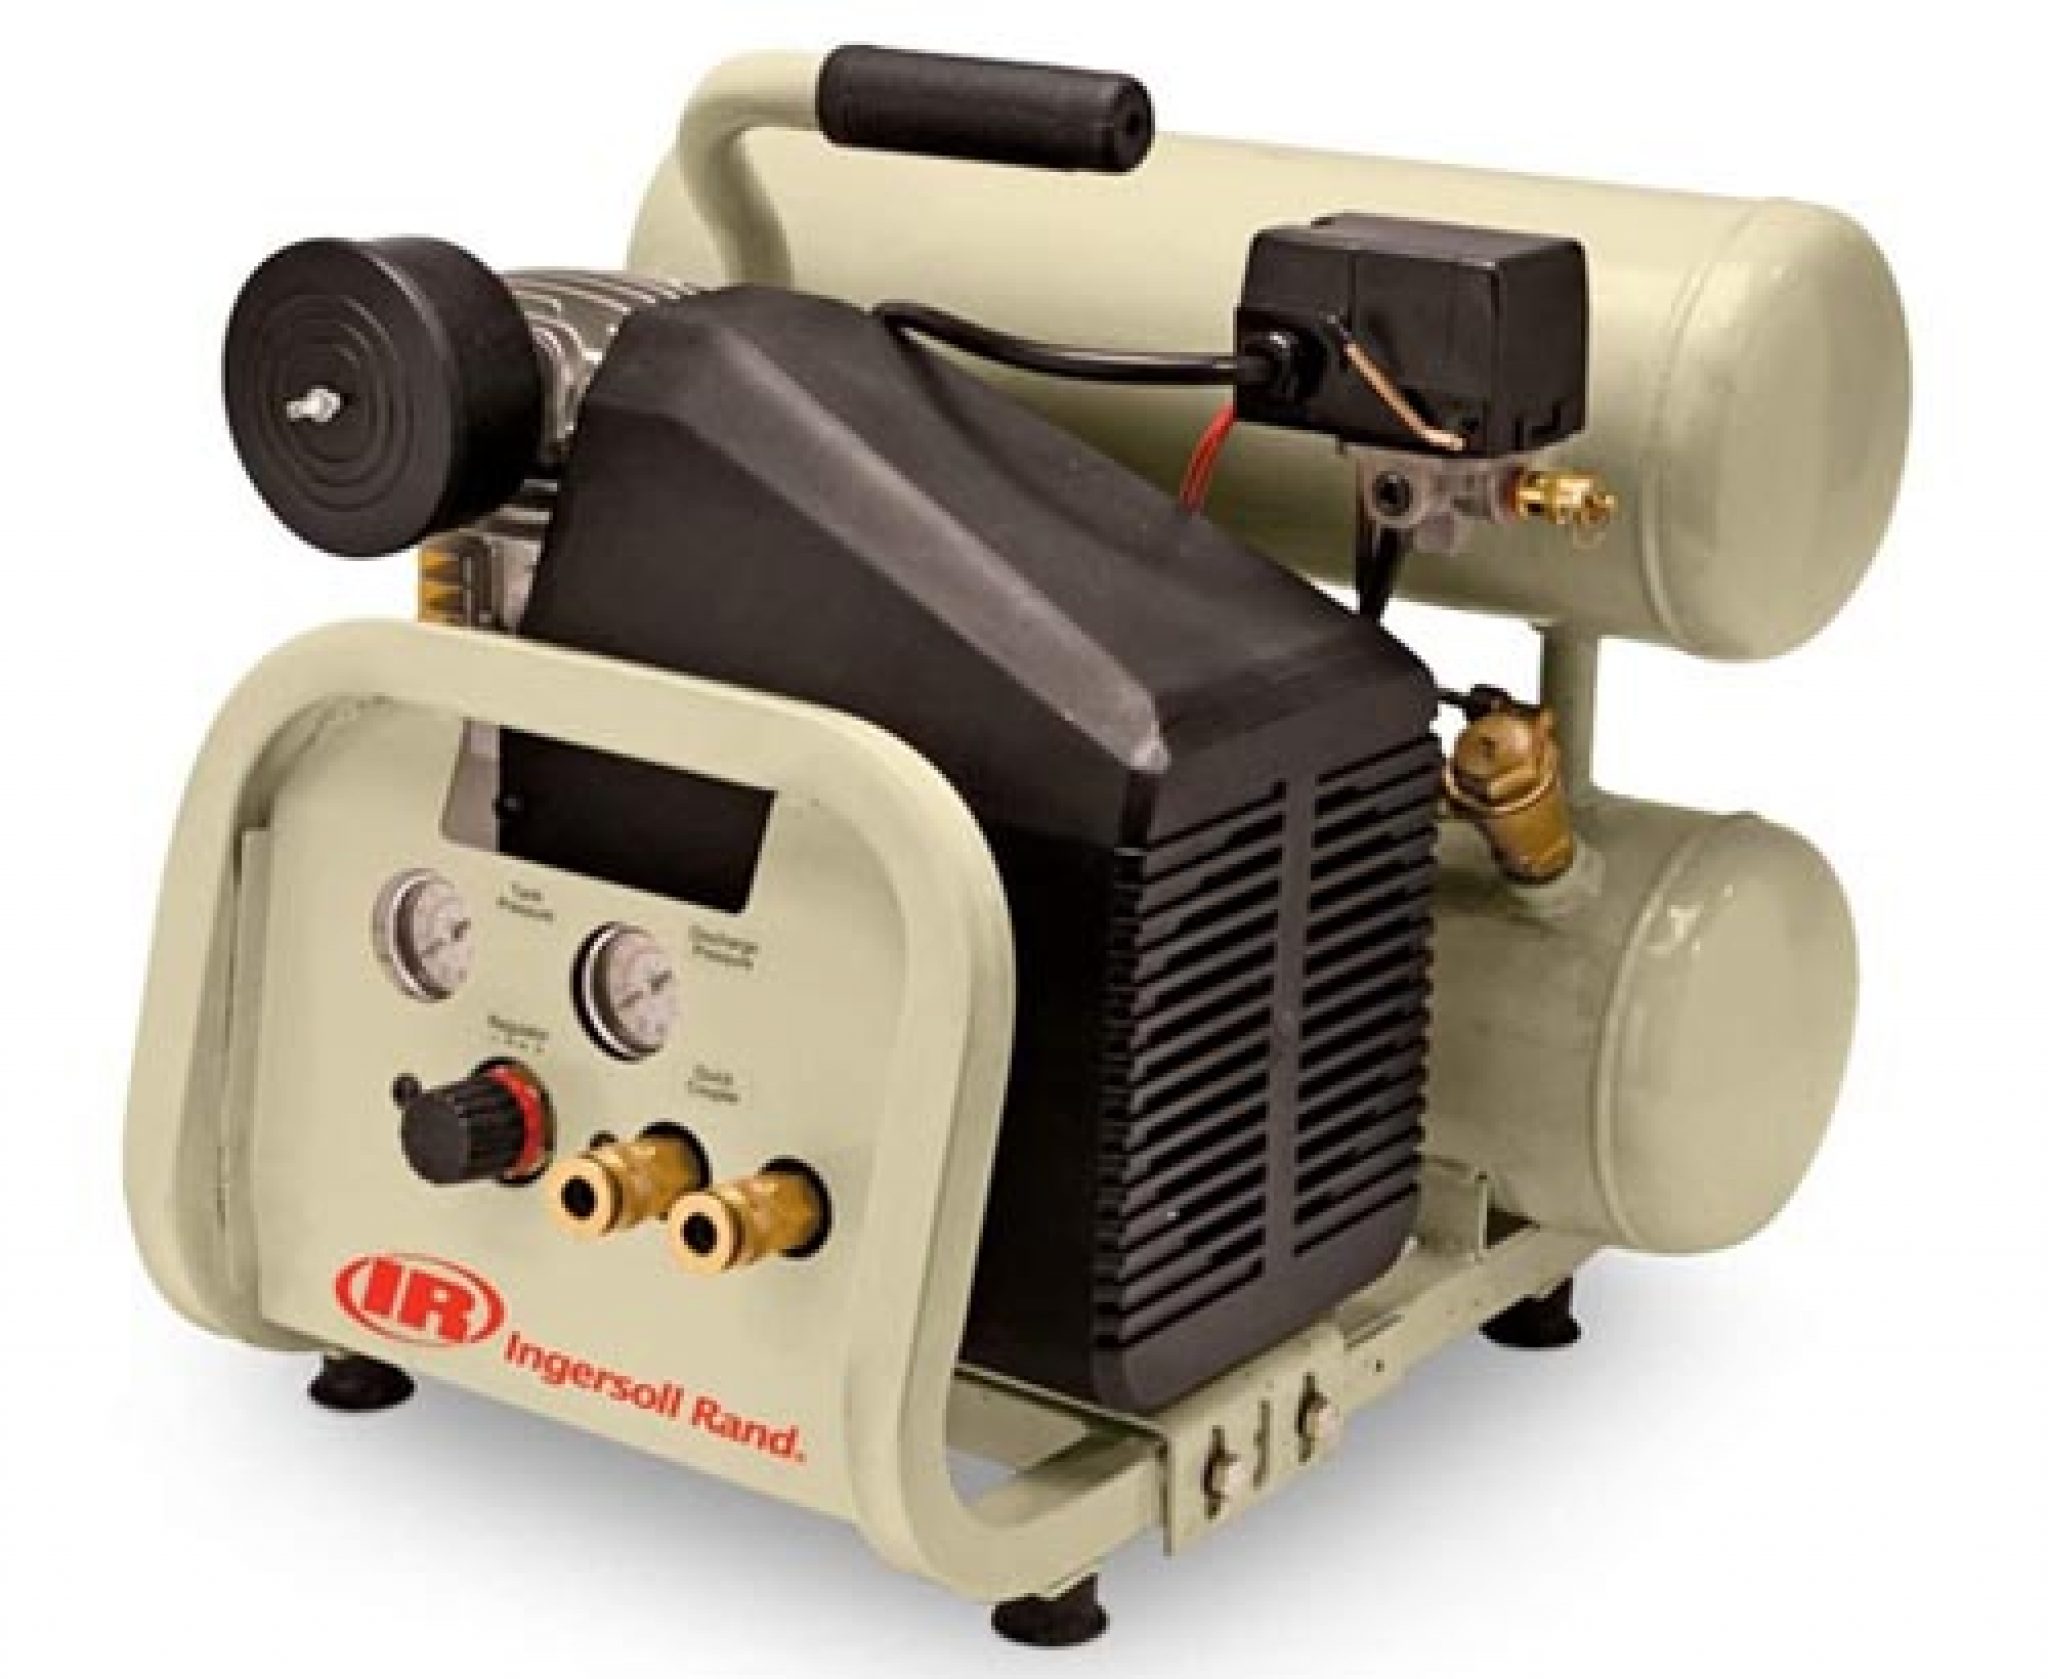 The Ultimate Checklist of Best Air Compressors for Home Garage Tools Sense